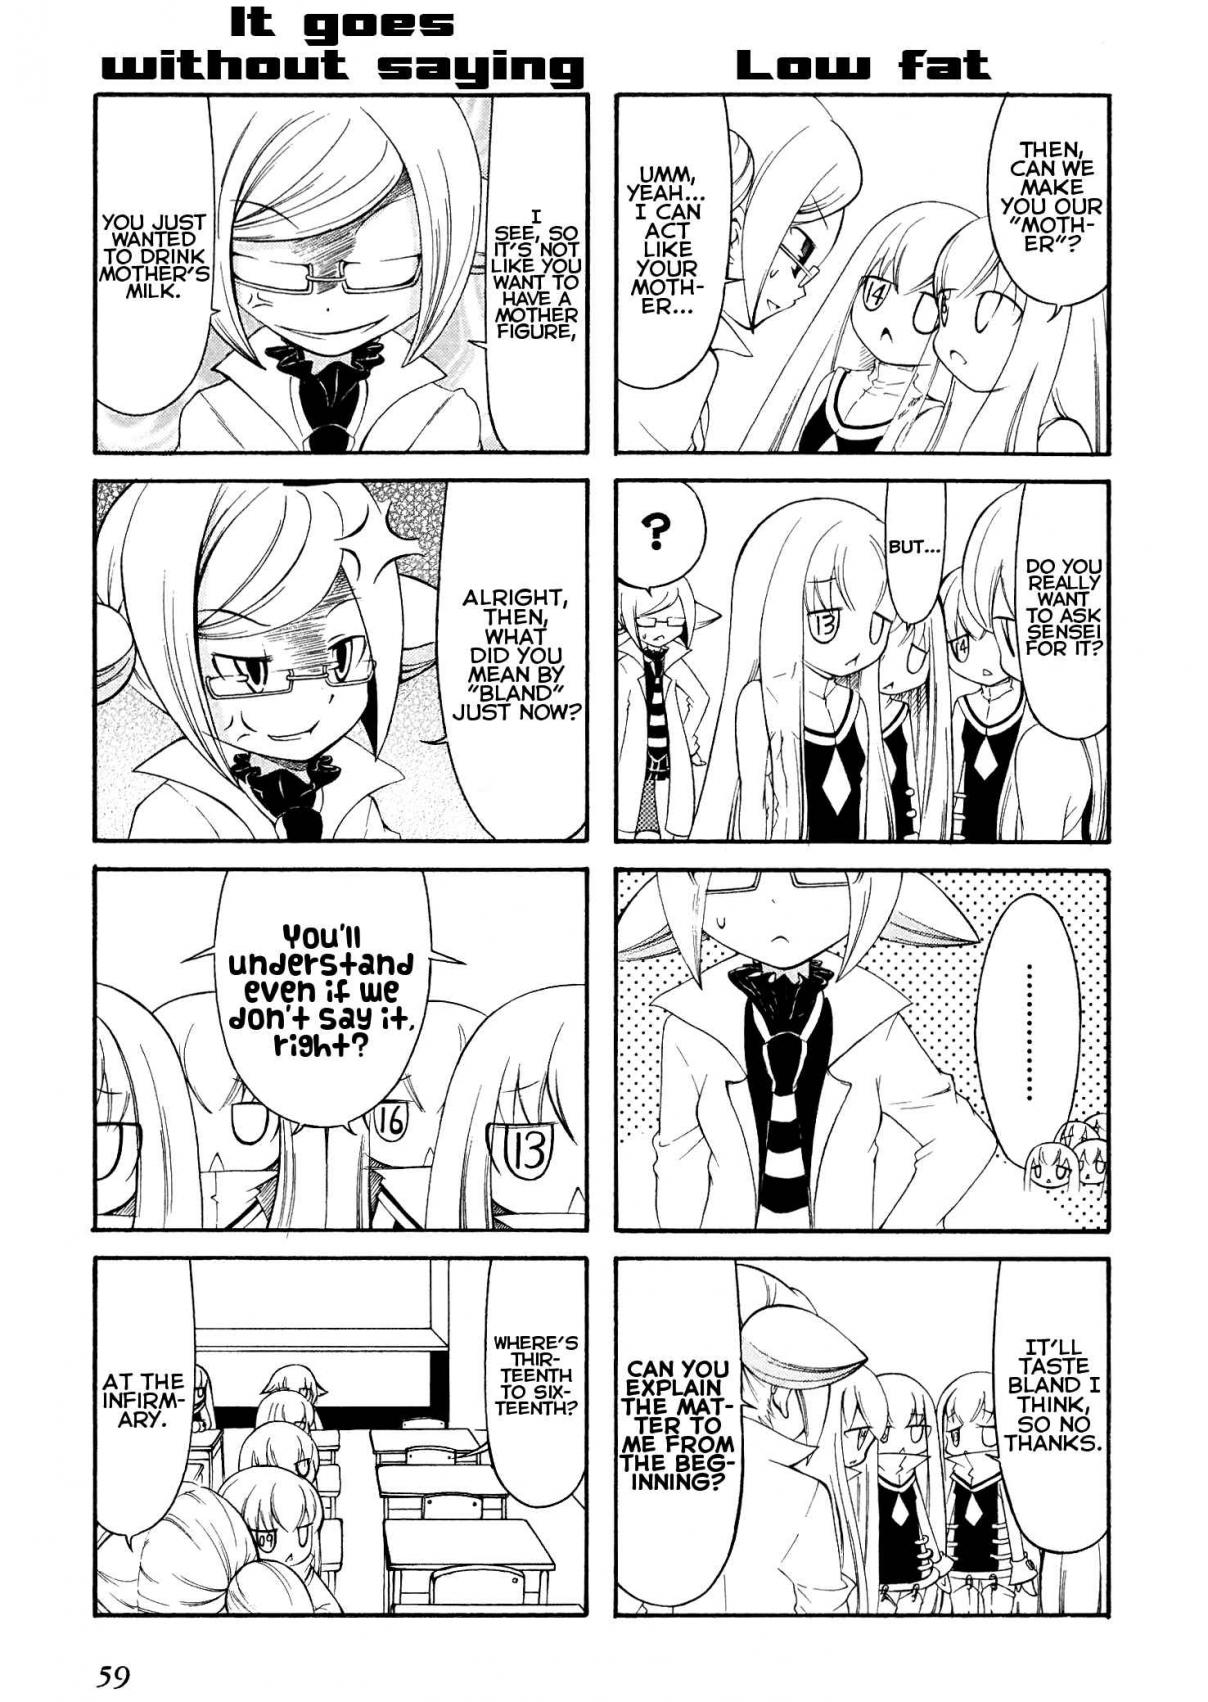 Number Girl Vol. 1 Ch. 8